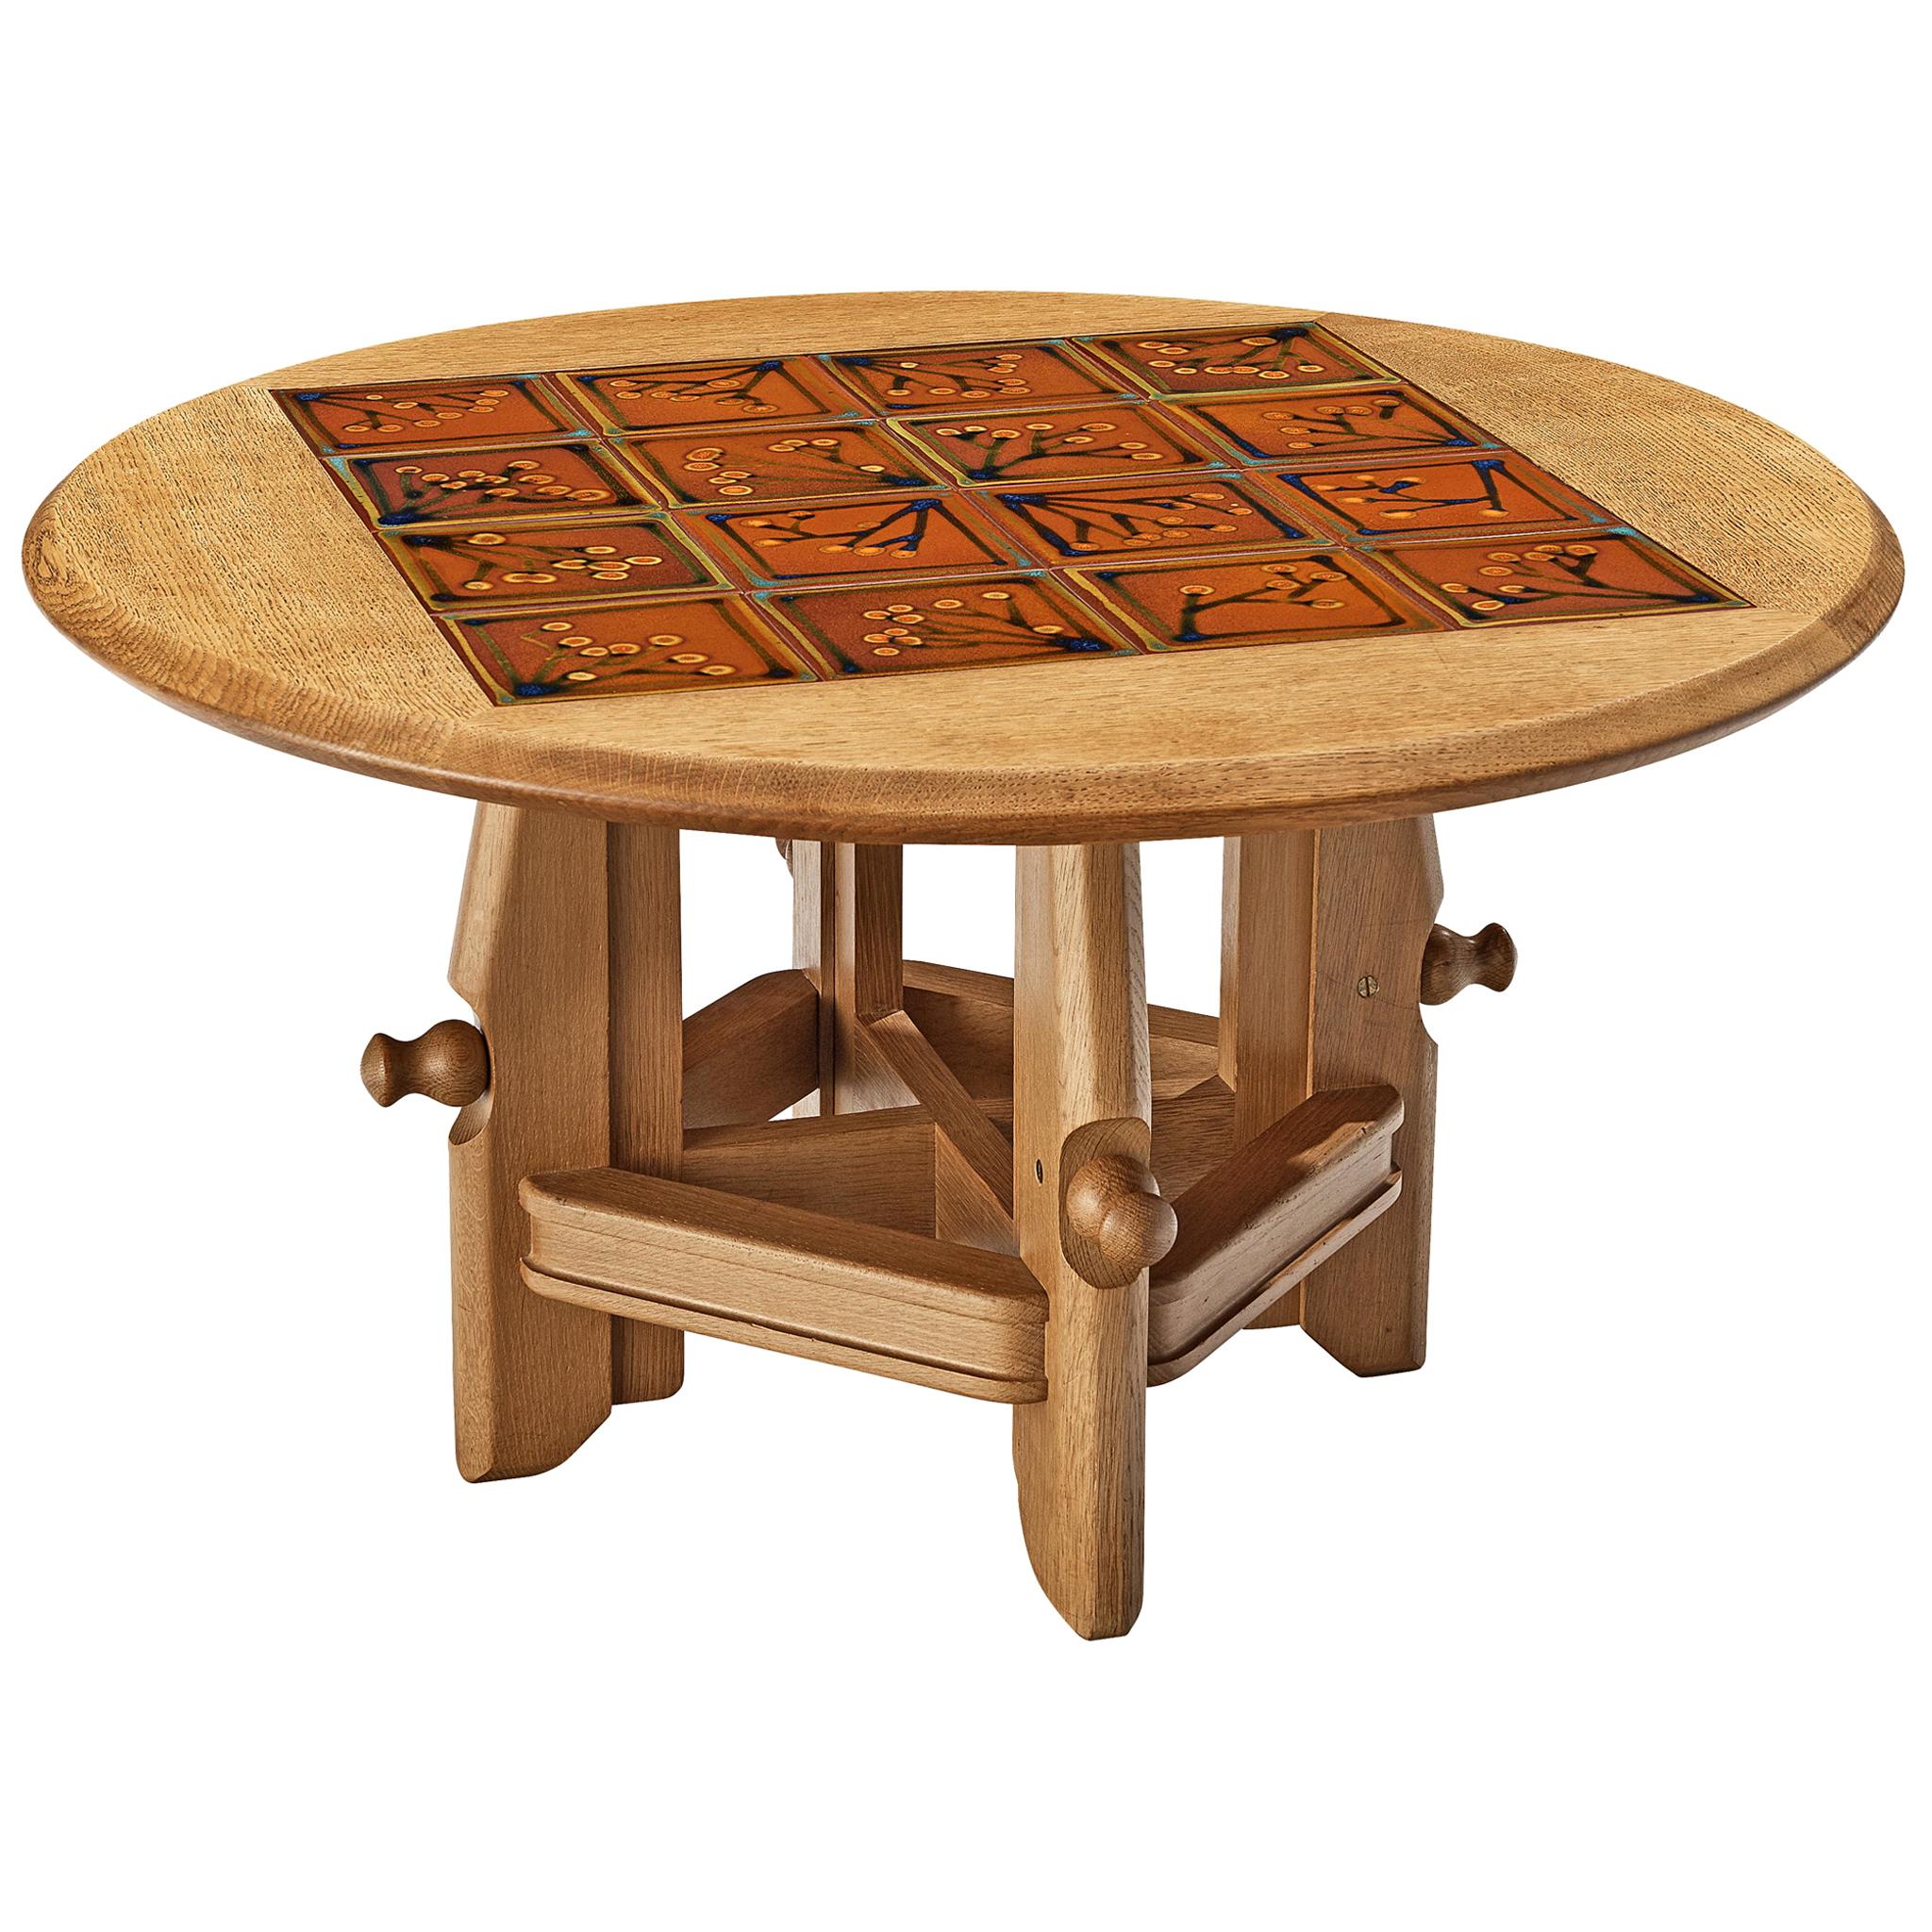 Guillerme et Chambron Adjustable Side Table with Ceramic Tiles